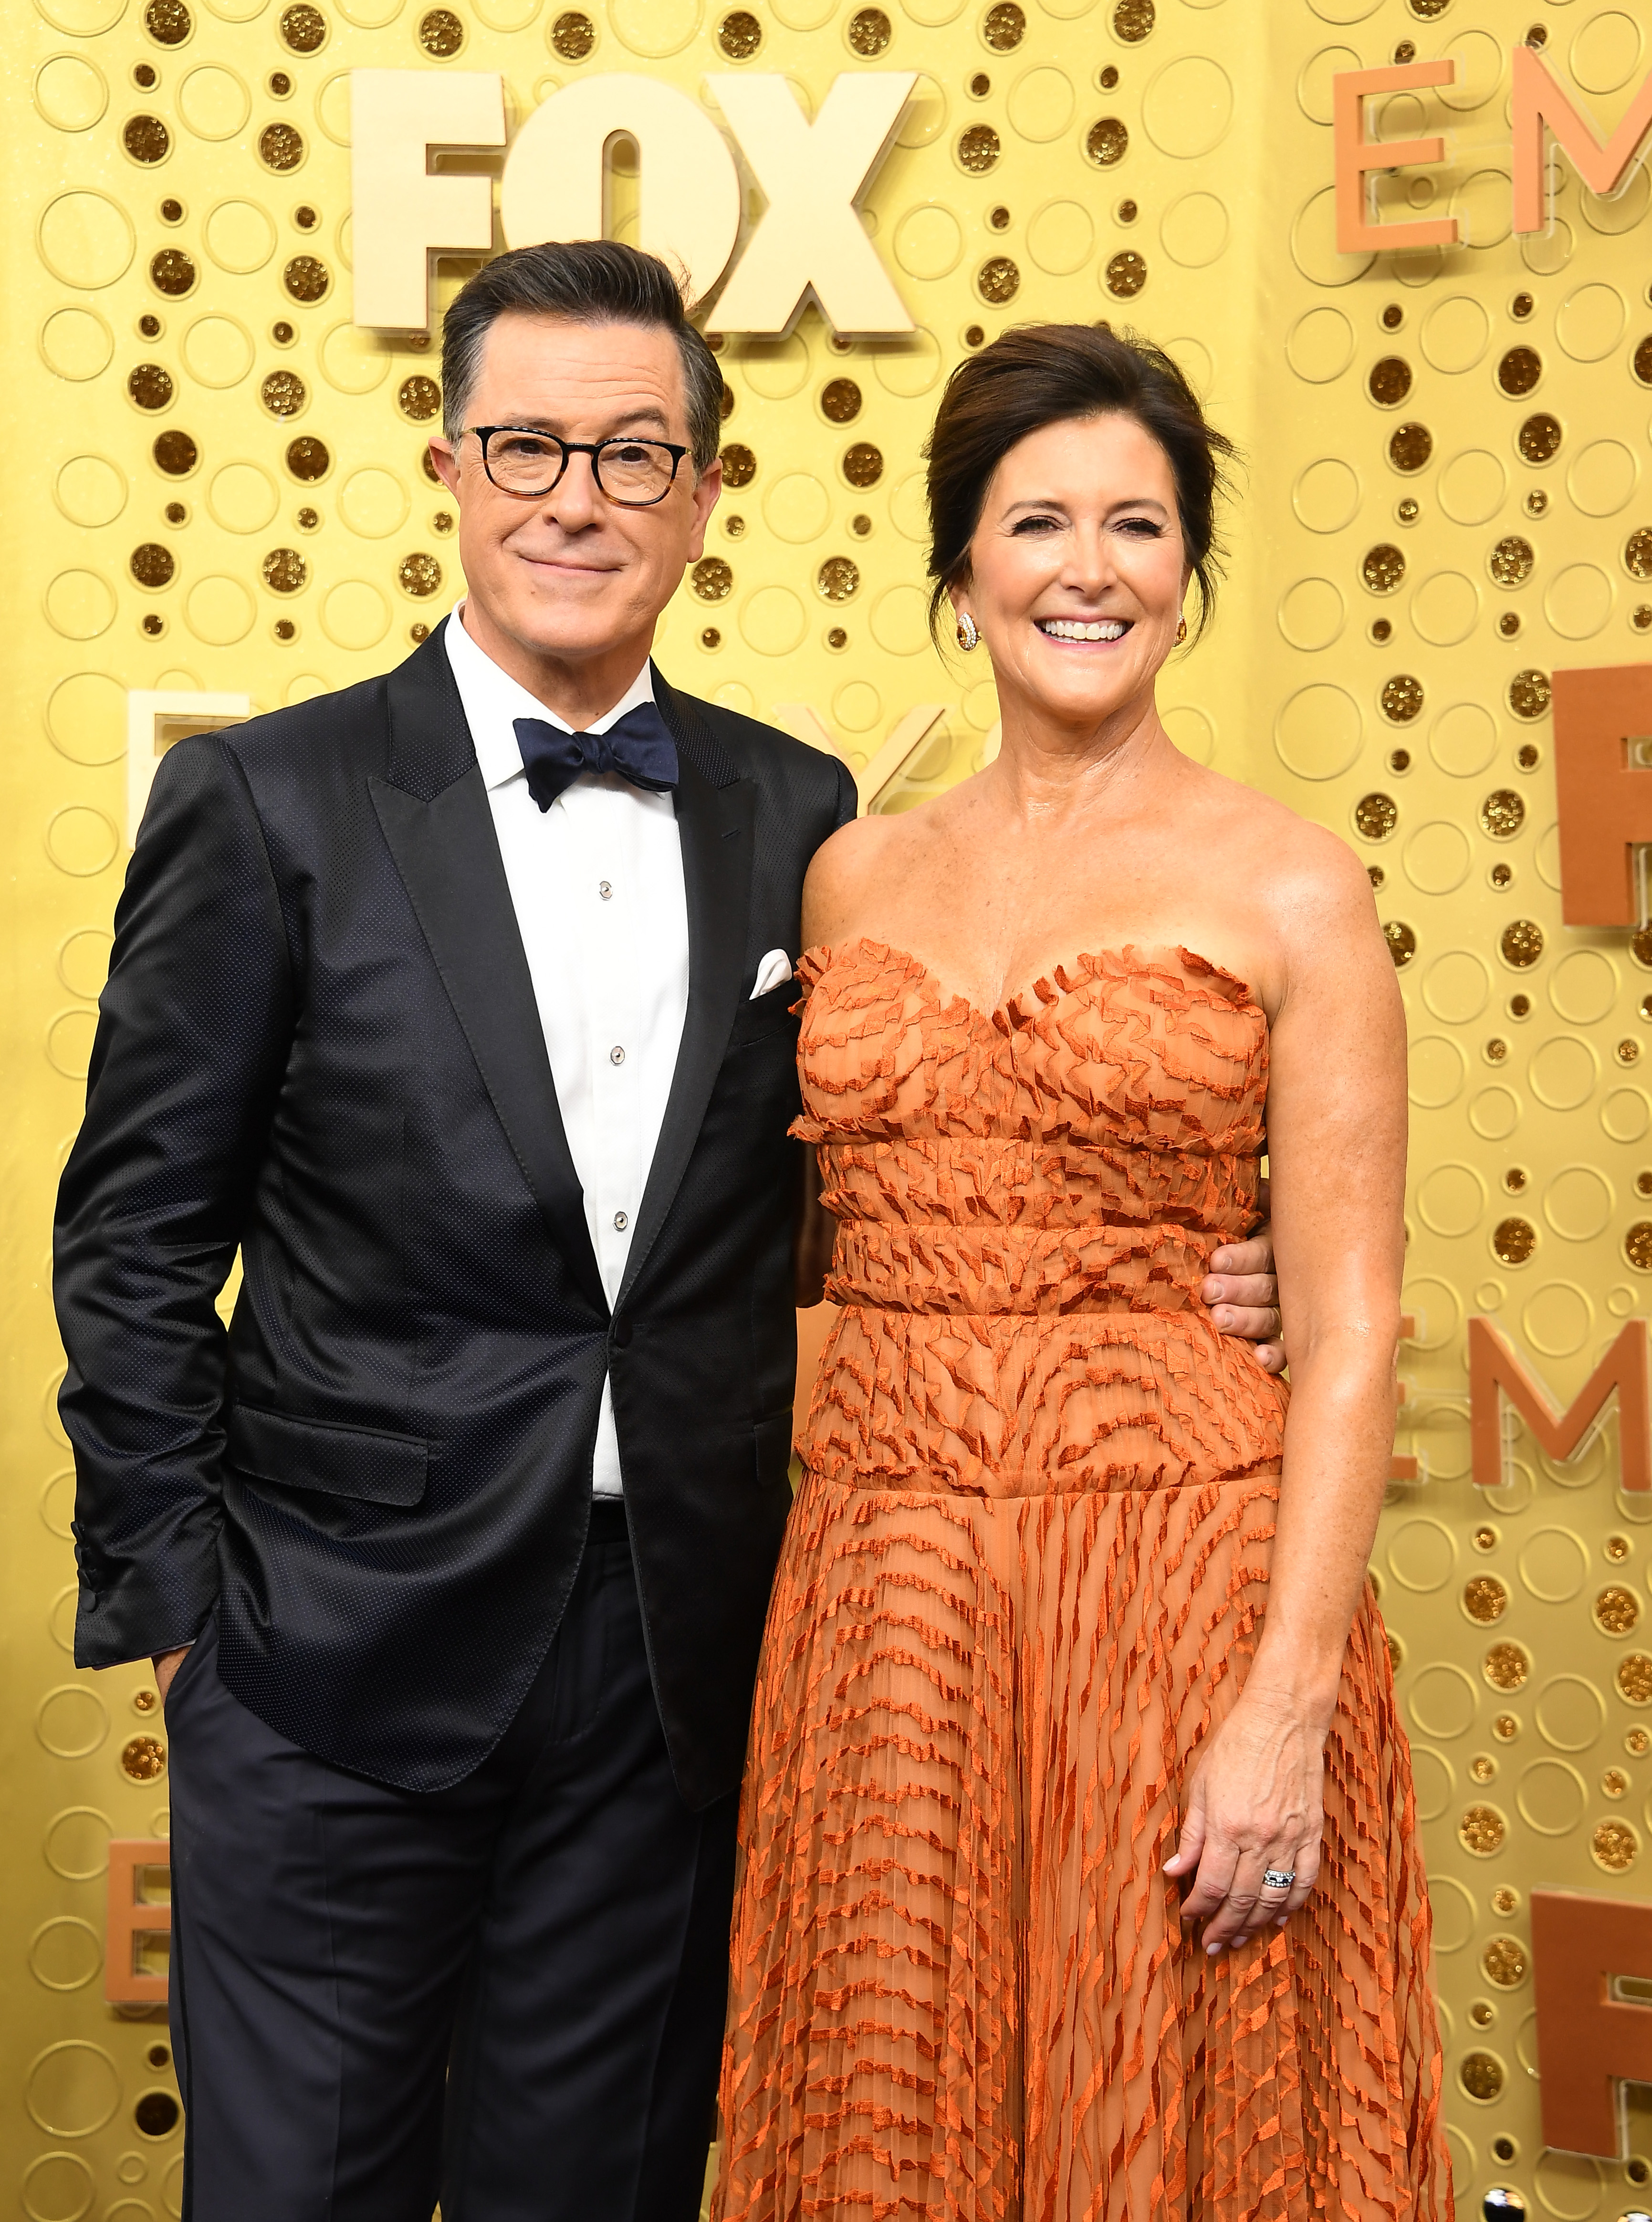 Stephen Colbert and Evelyn McGee-Colbert attend the 71st Emmy Awards at Microsoft Theater on September 22, 2019, in Los Angeles, California. | Source: Getty Images